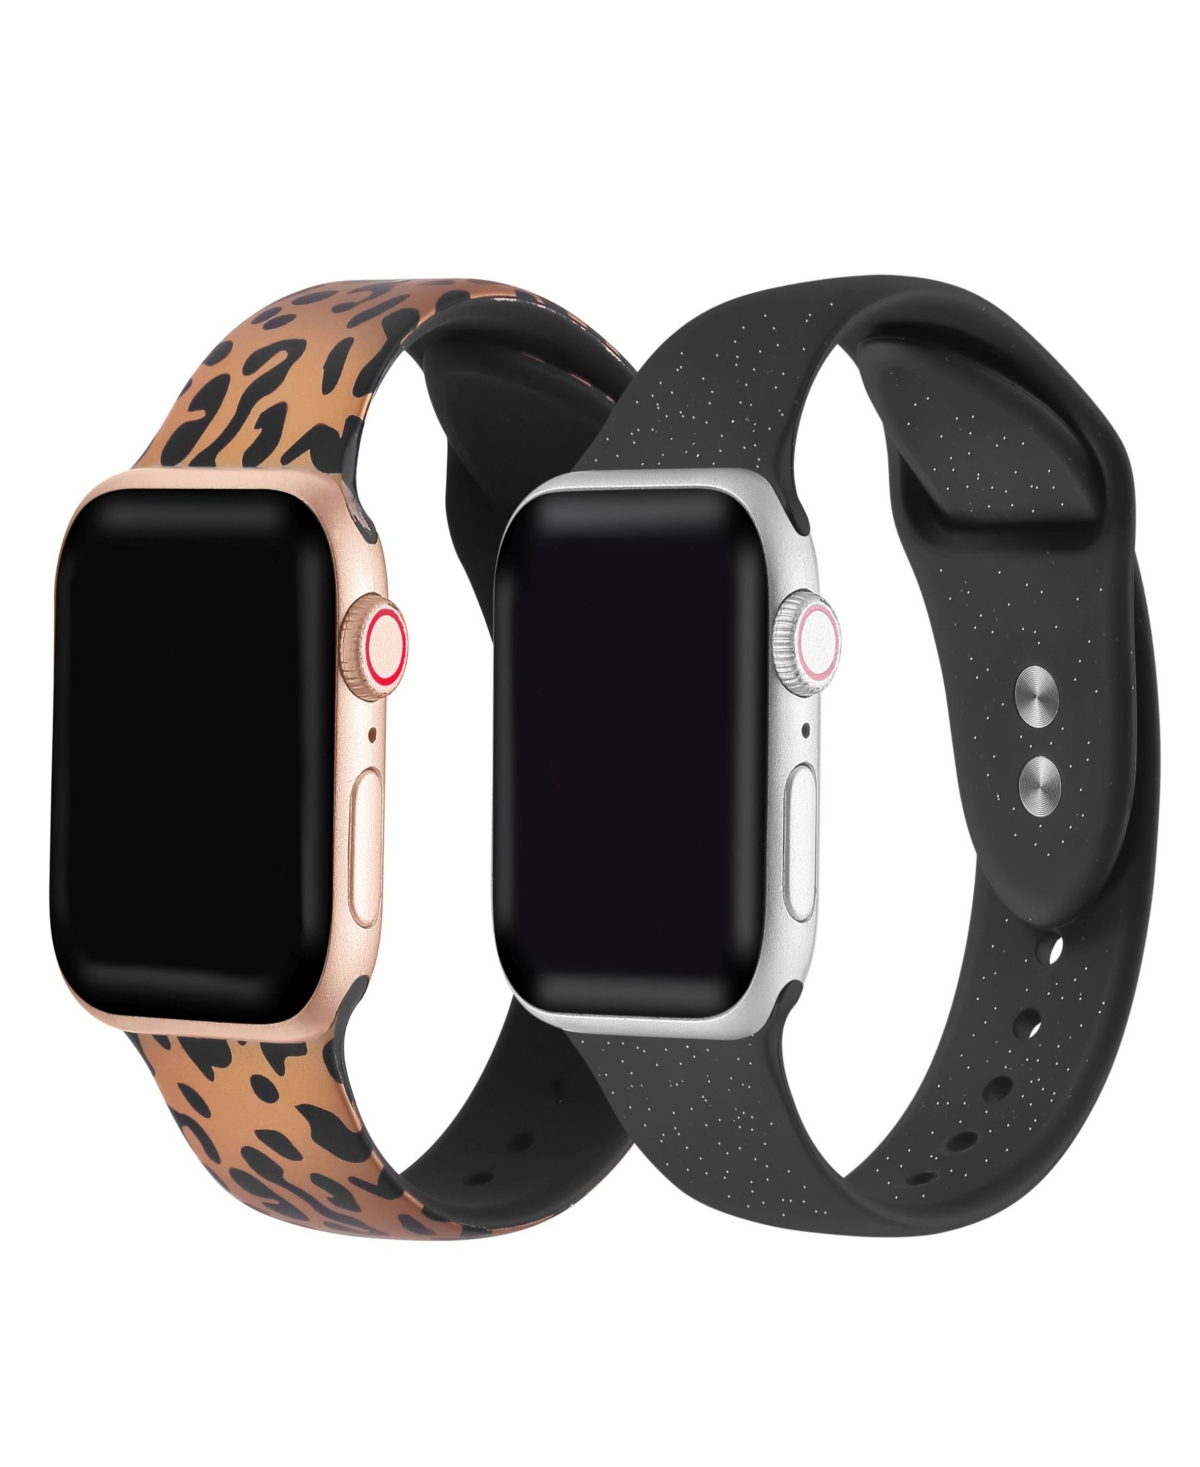 Men's and Women's Rose Gold Tone Cheetah and Black Glitter 2 Piece Silicone Band for Apple Watch 38mm - Multi